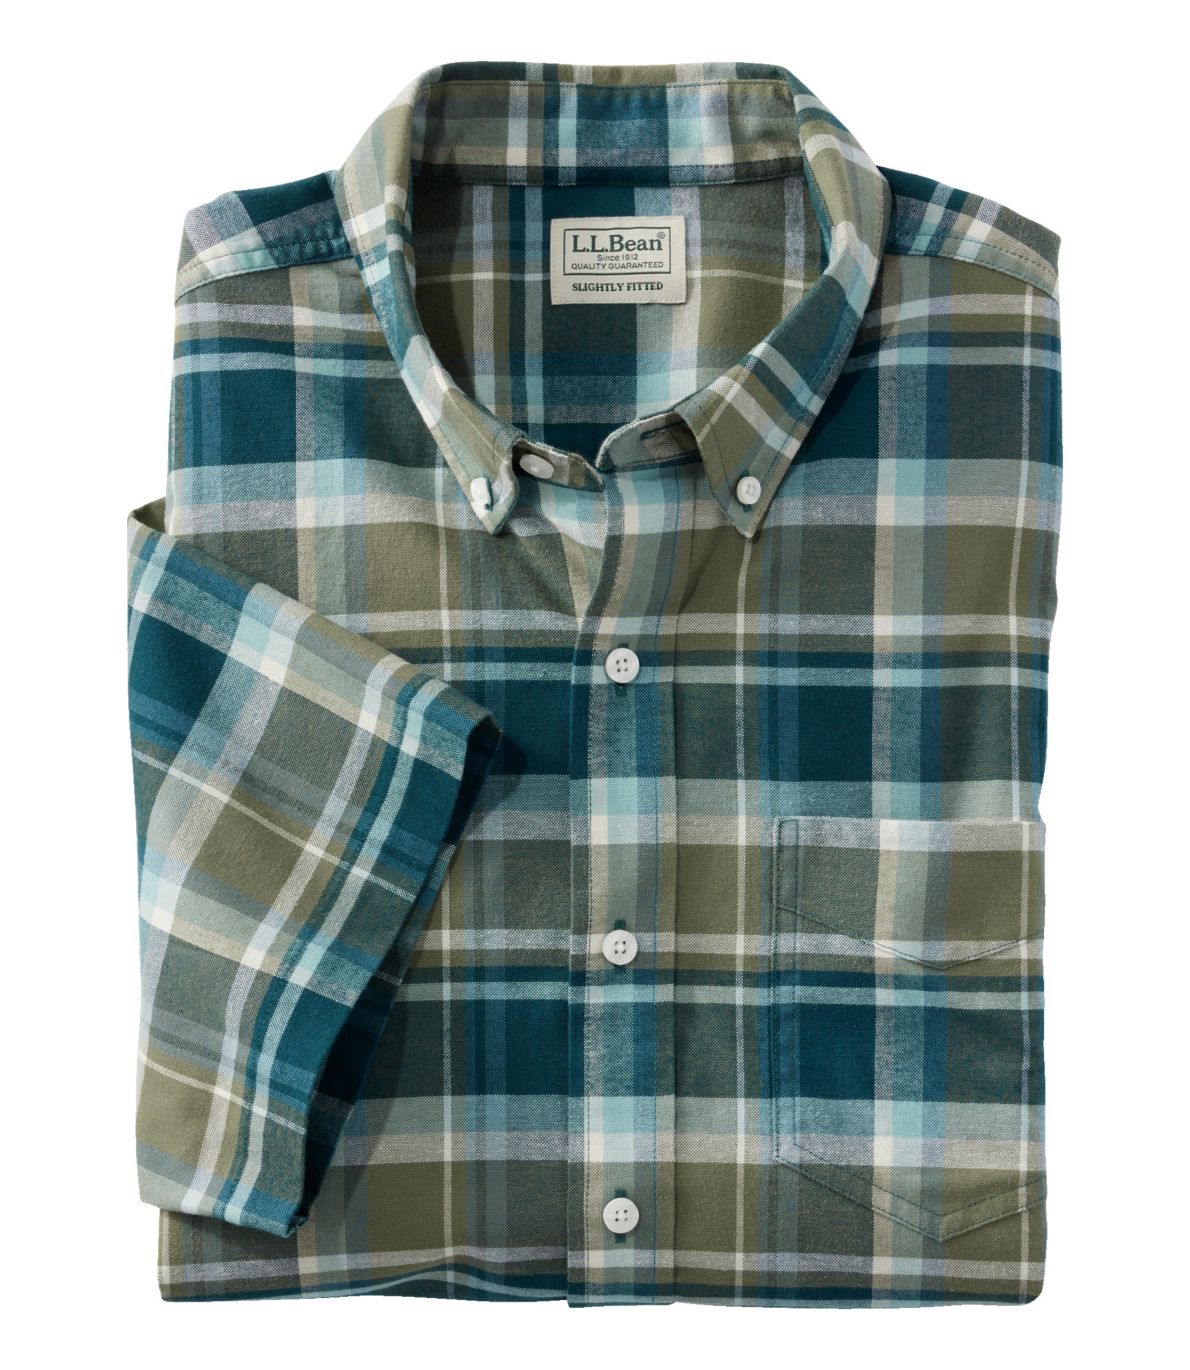 Men's Comfort Stretch Oxford, Slightly Fitted Untucked Fit, Short-Sleeve, Plaid